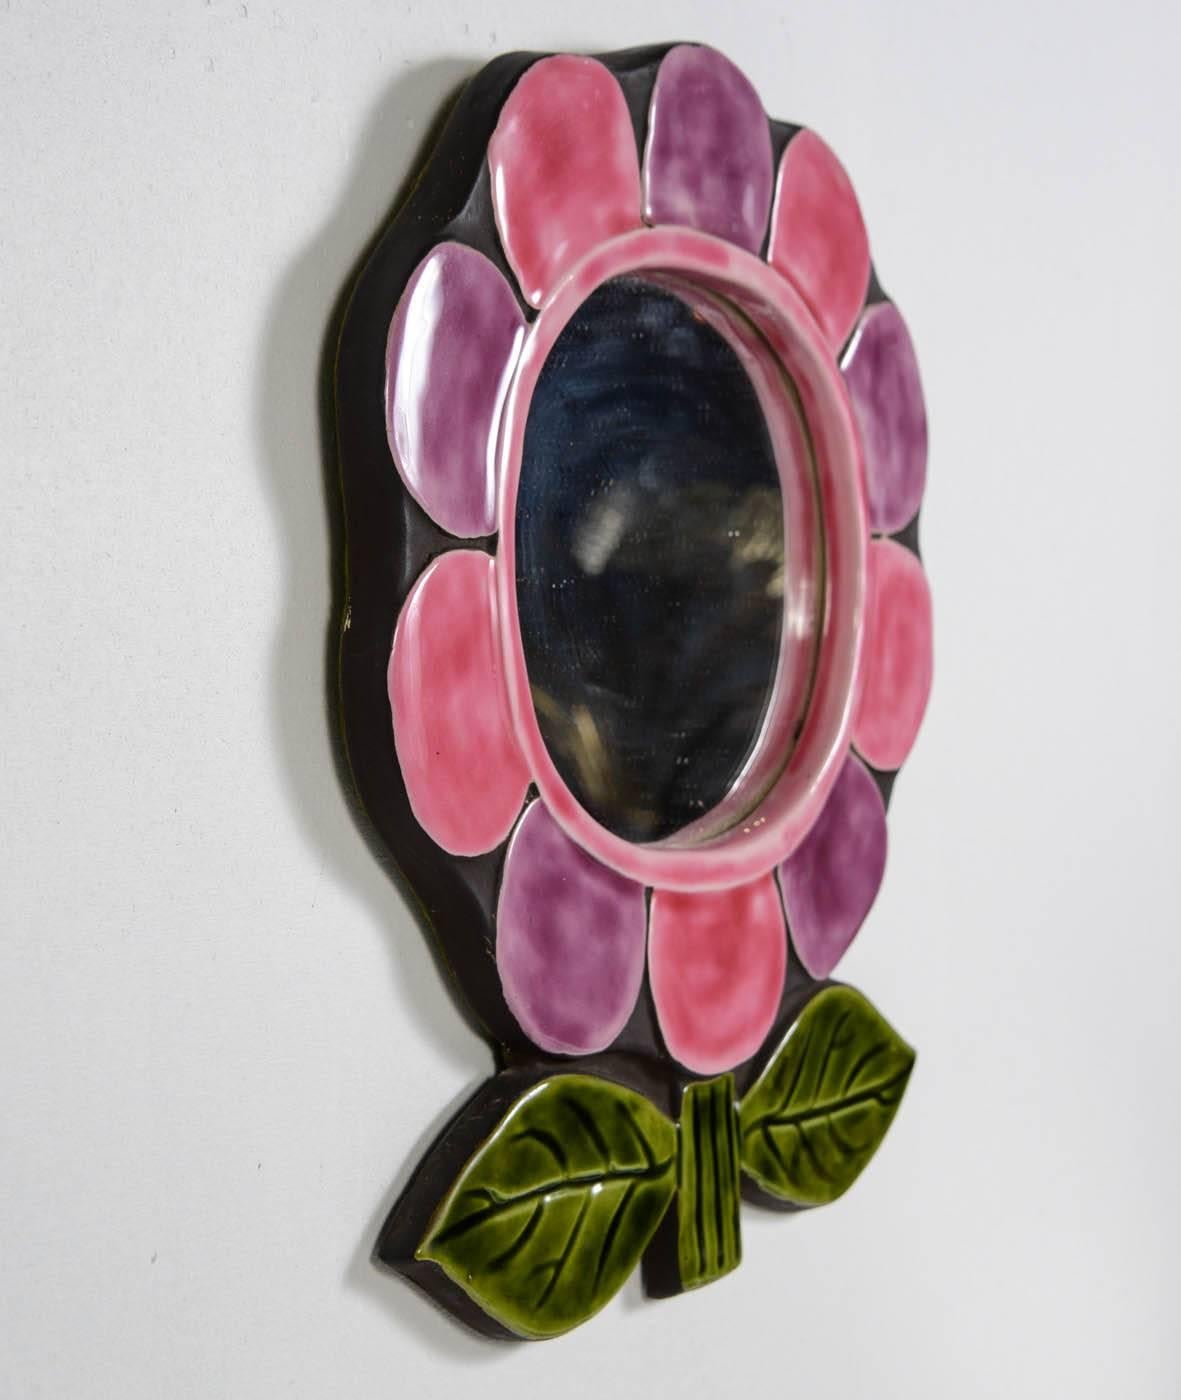 French 1970s Ceramic Mirror by Catherine Benito